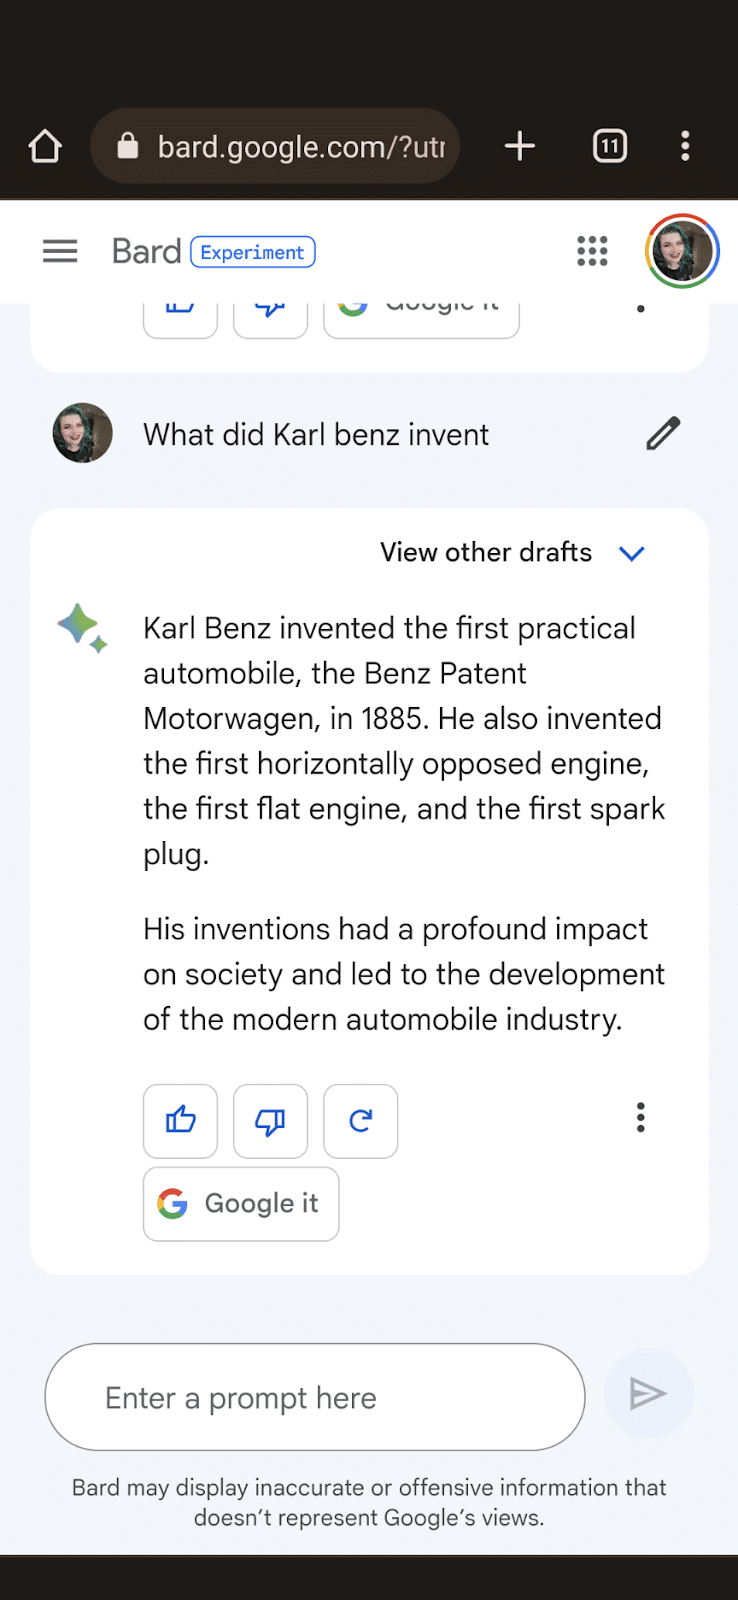 Bard - What did Karl Benz invent